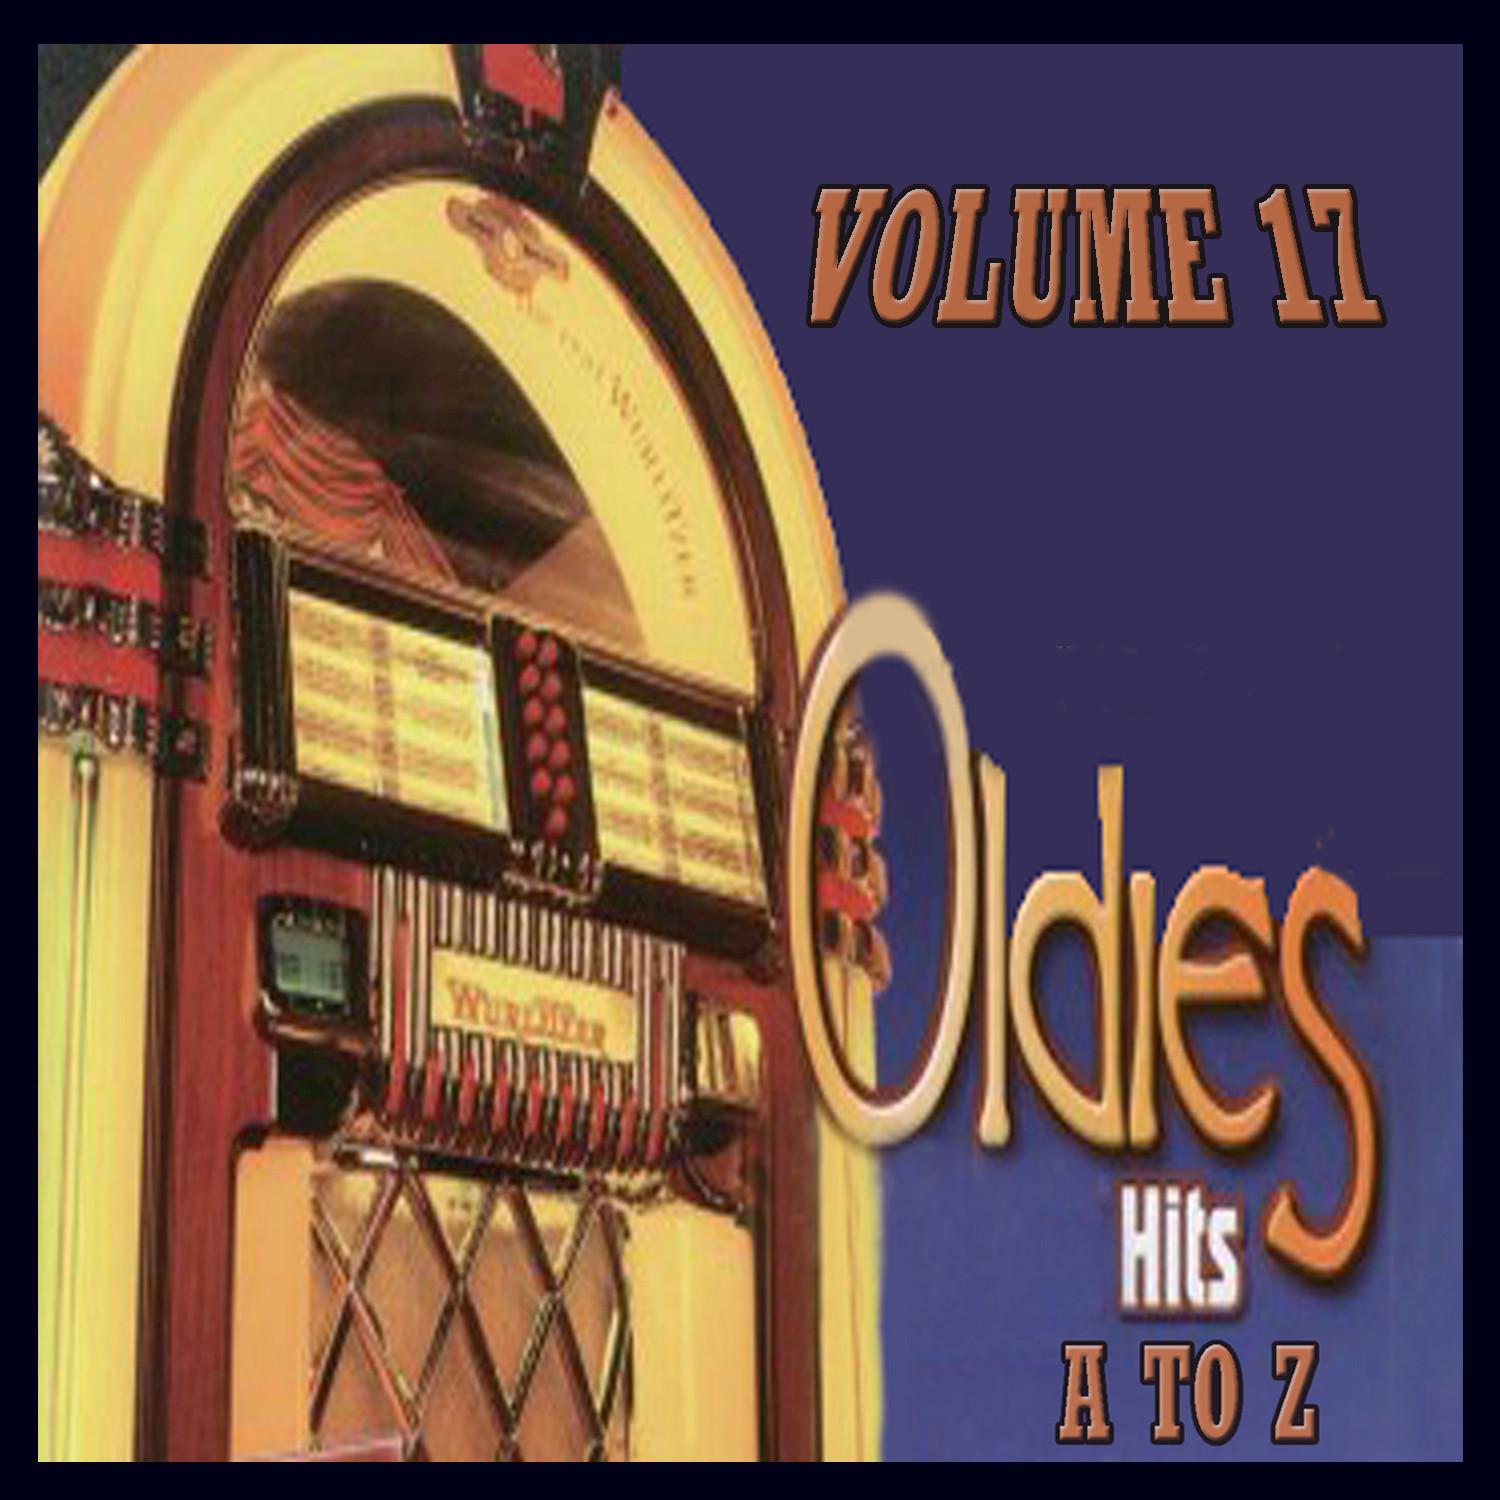 Oldies Hits A to Z, Vol. 17